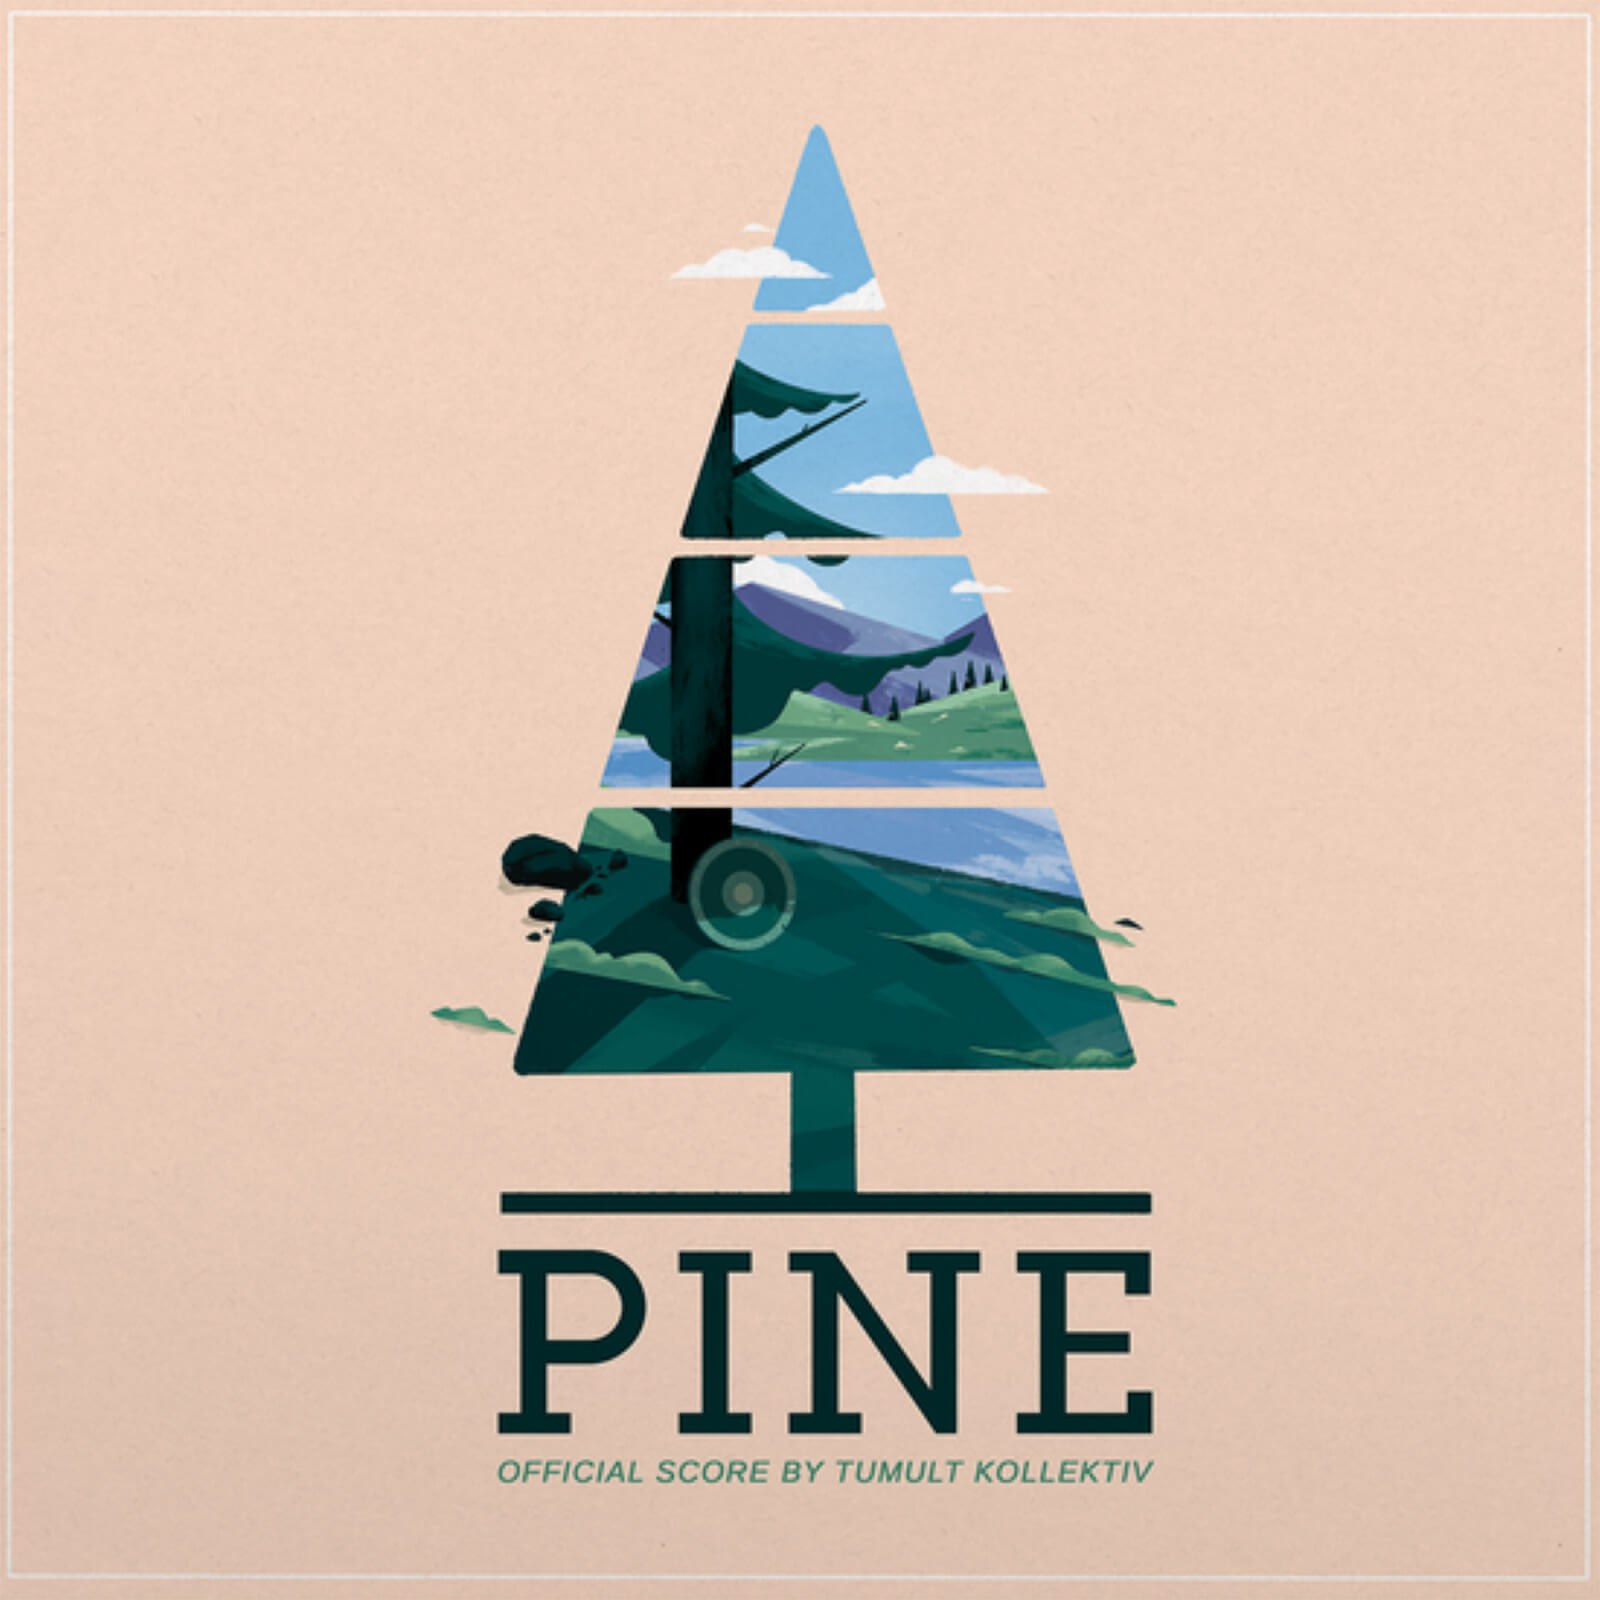 Pine (Official Score) 140g LP (Transparent Turquoise And Green)